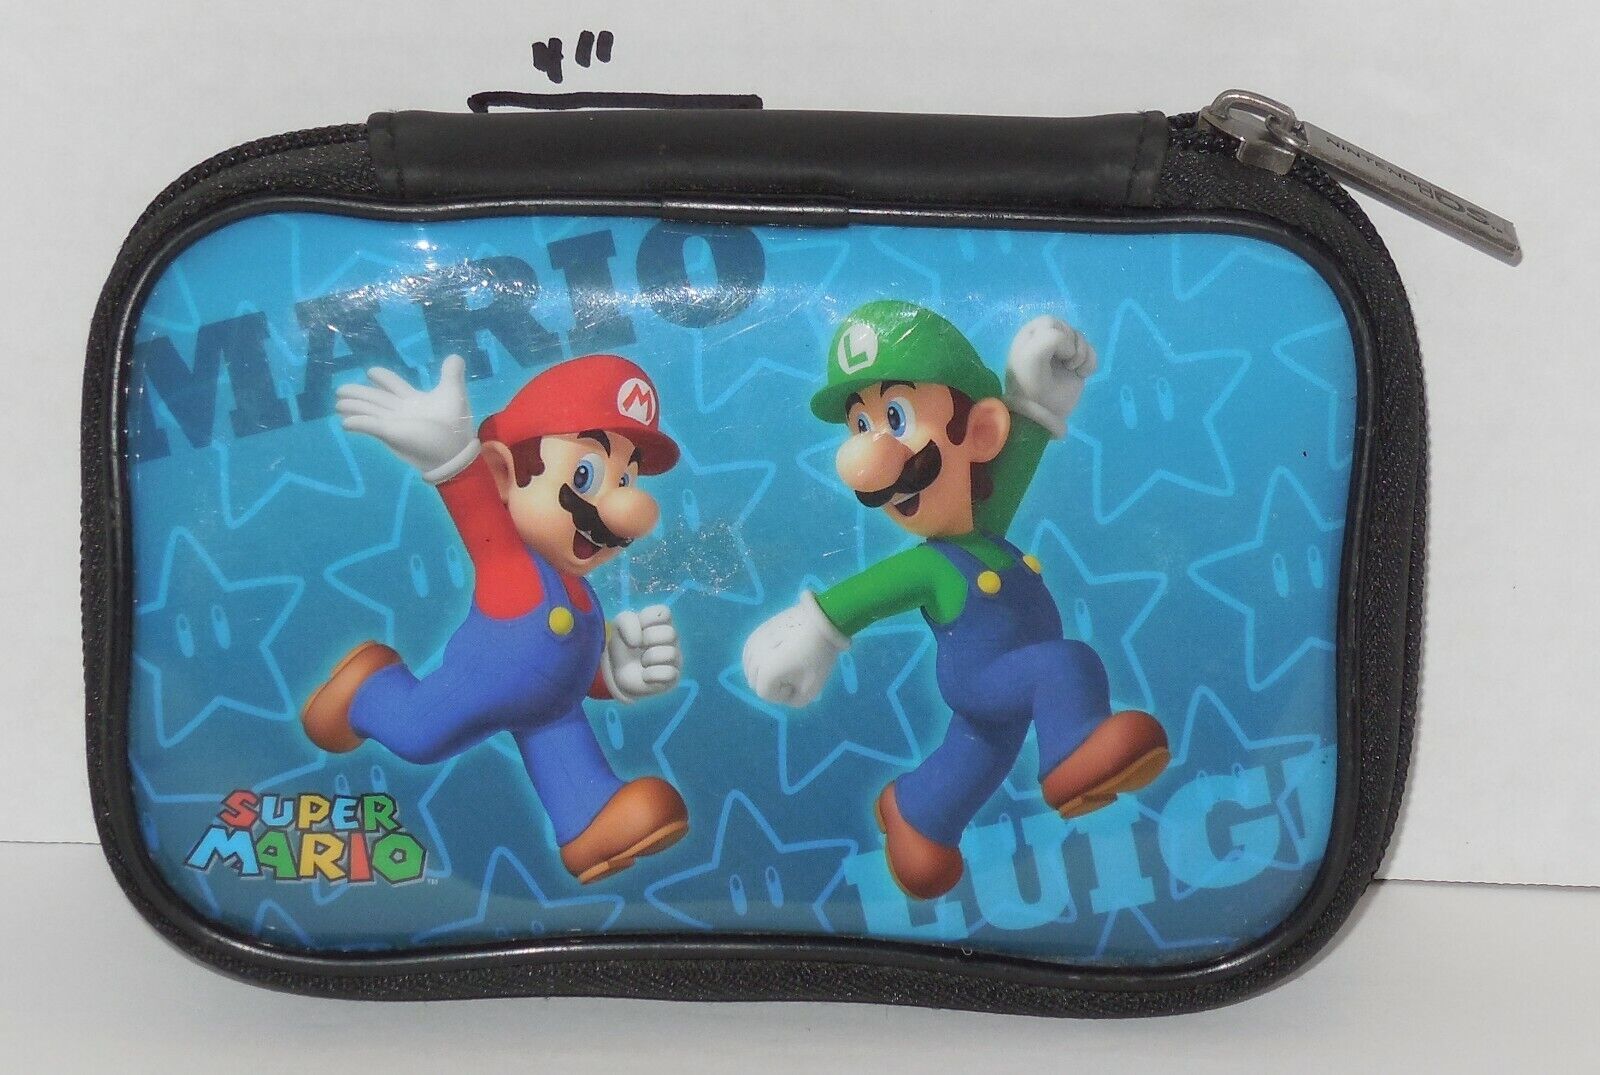 Nintendo DS Carrying Case Blue with picture of Mario & Luigi On front - $9.85